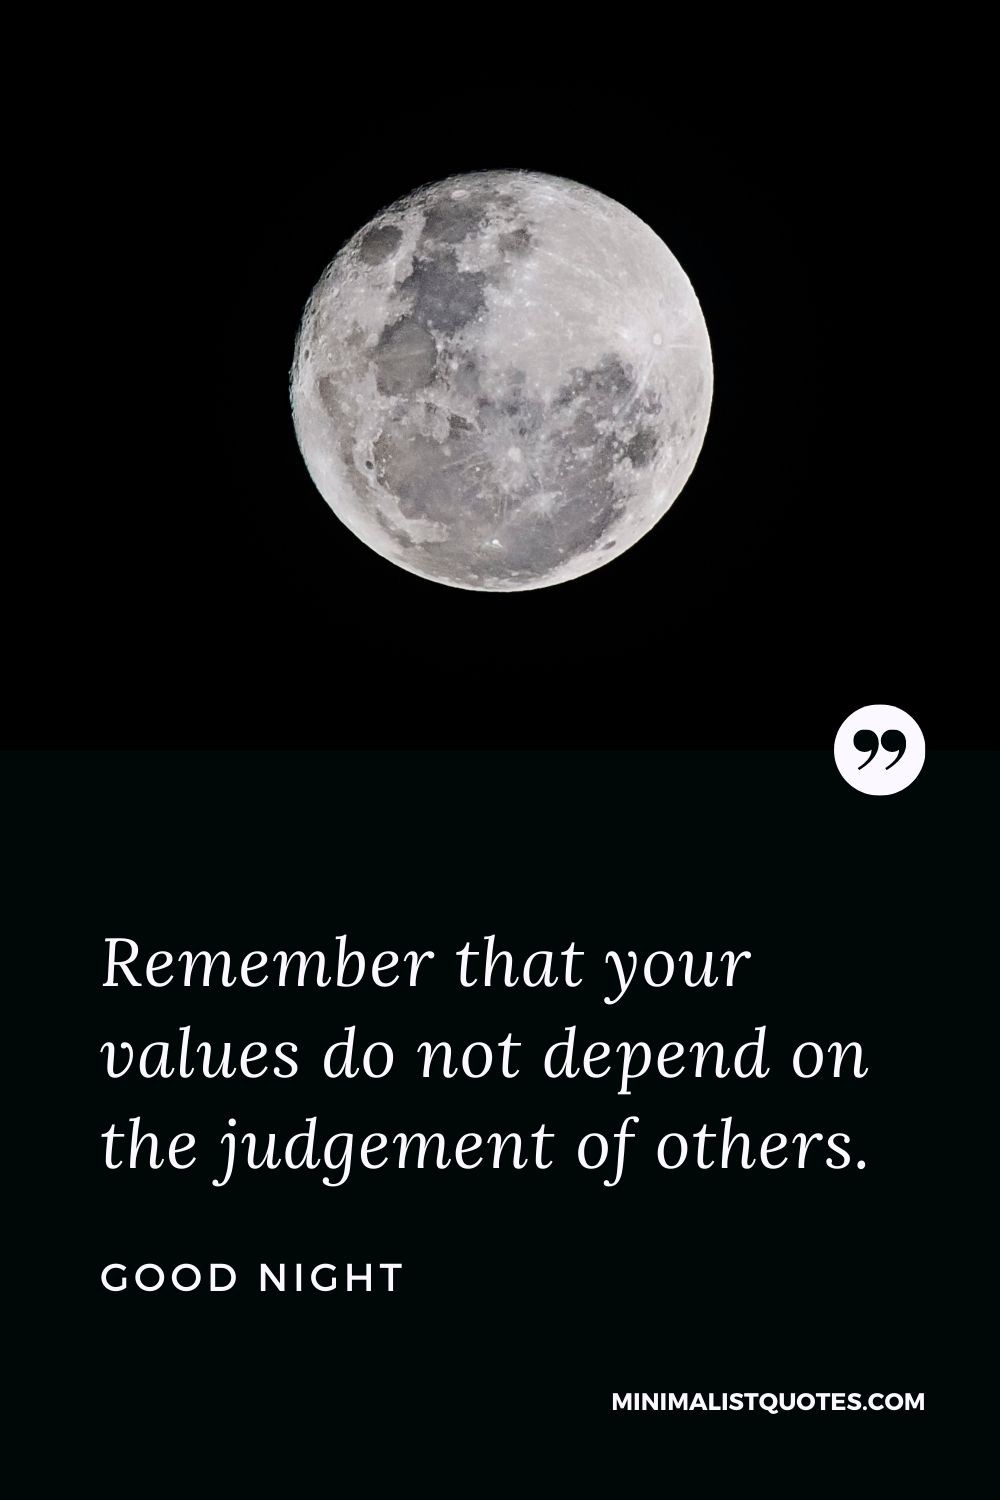 Good Night Wishes - Remember that your values do not depend on the judgement of others.